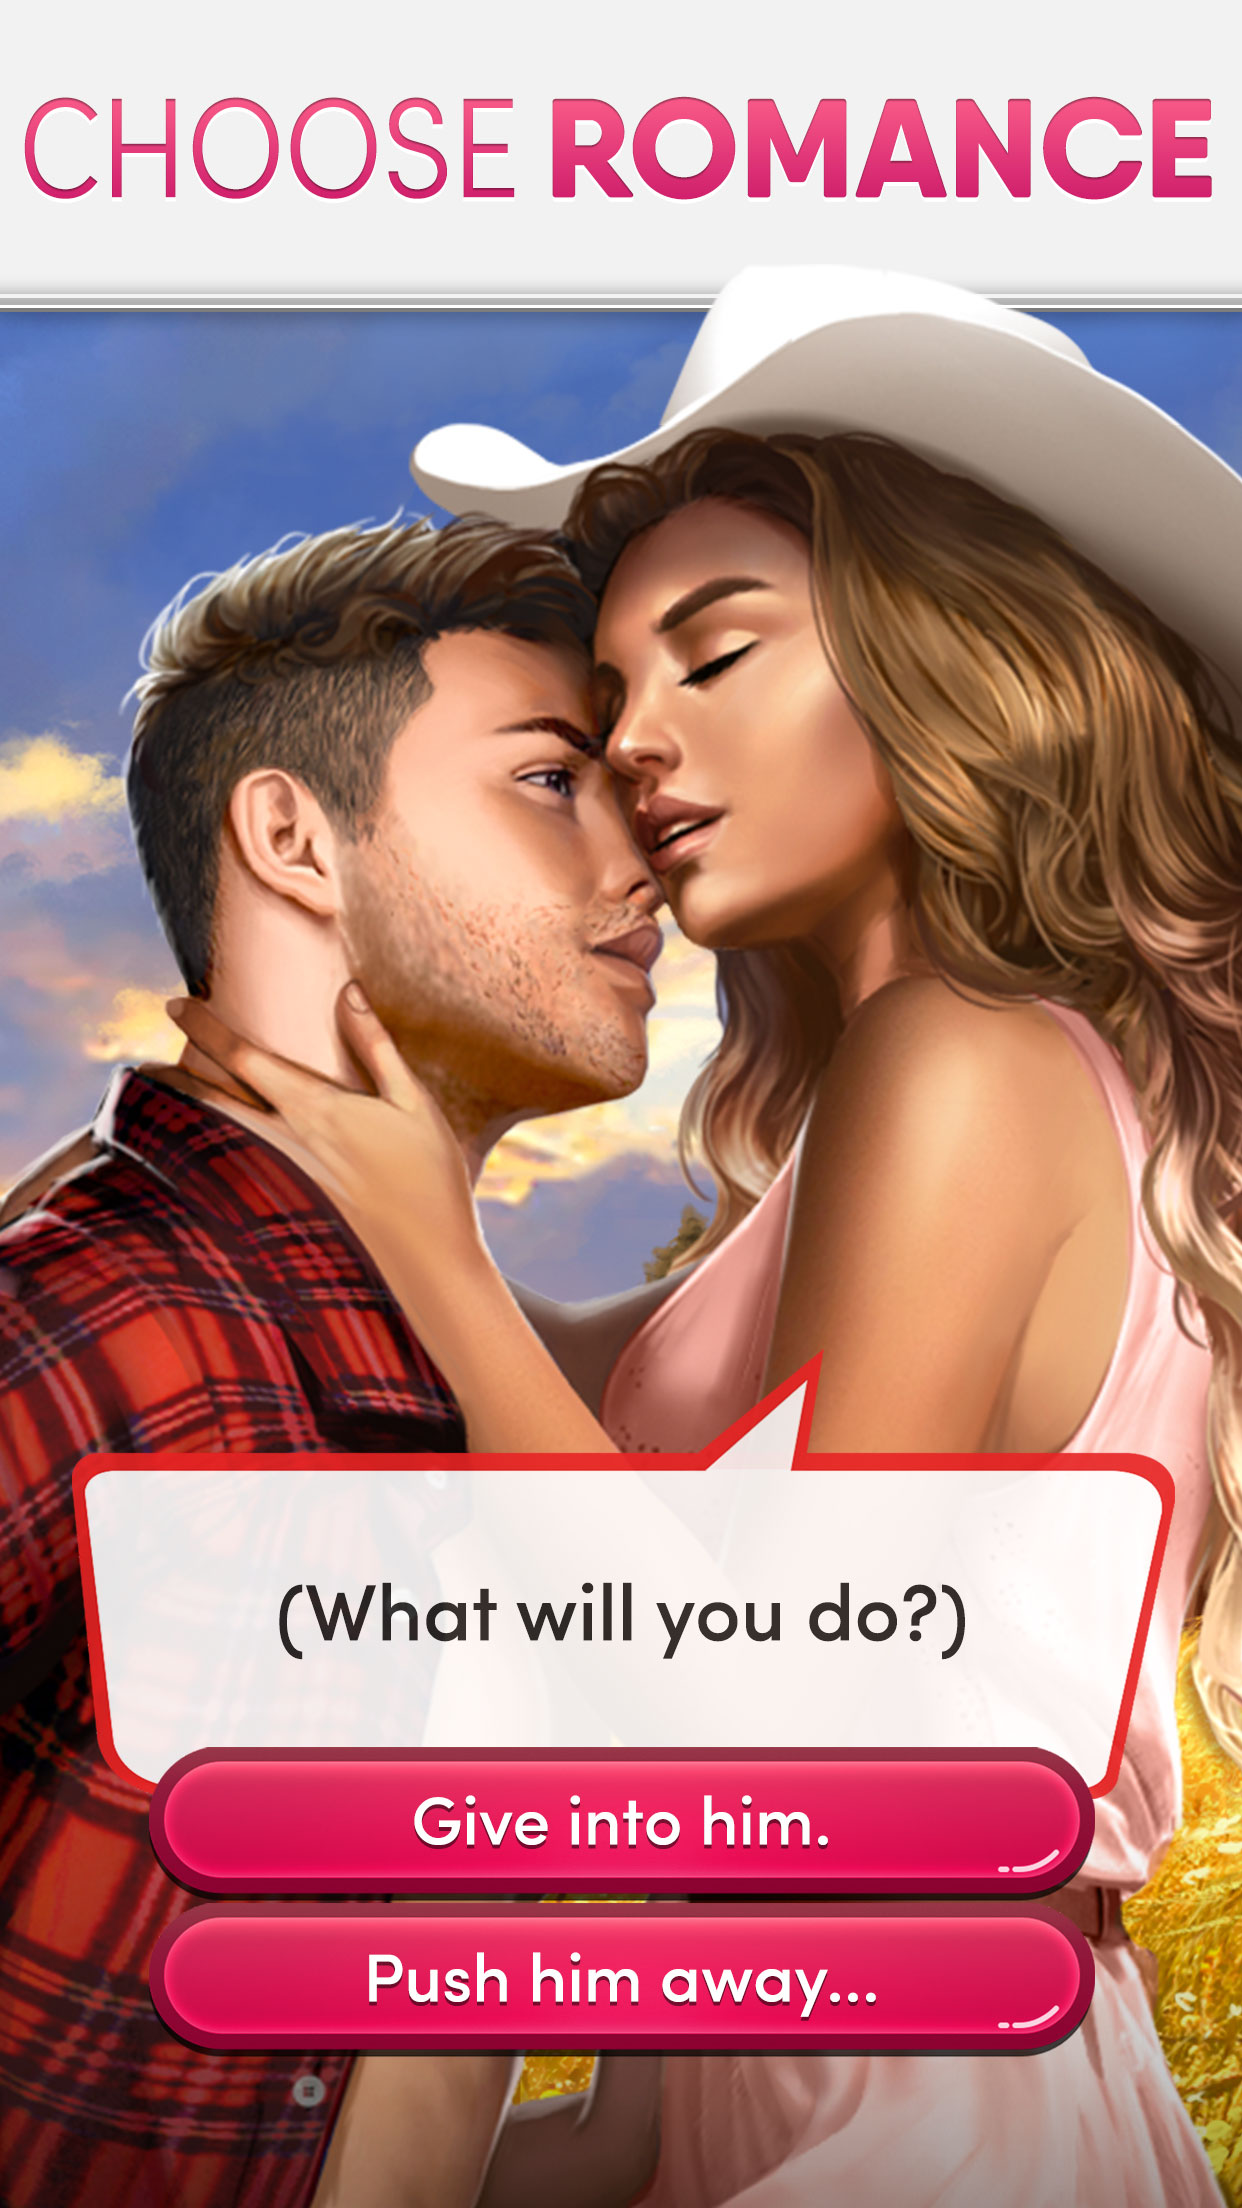 Choices stories you. Choices stories you Play игра. Choices stories VIP. Choices. Choices stories you Play Mod VIP.